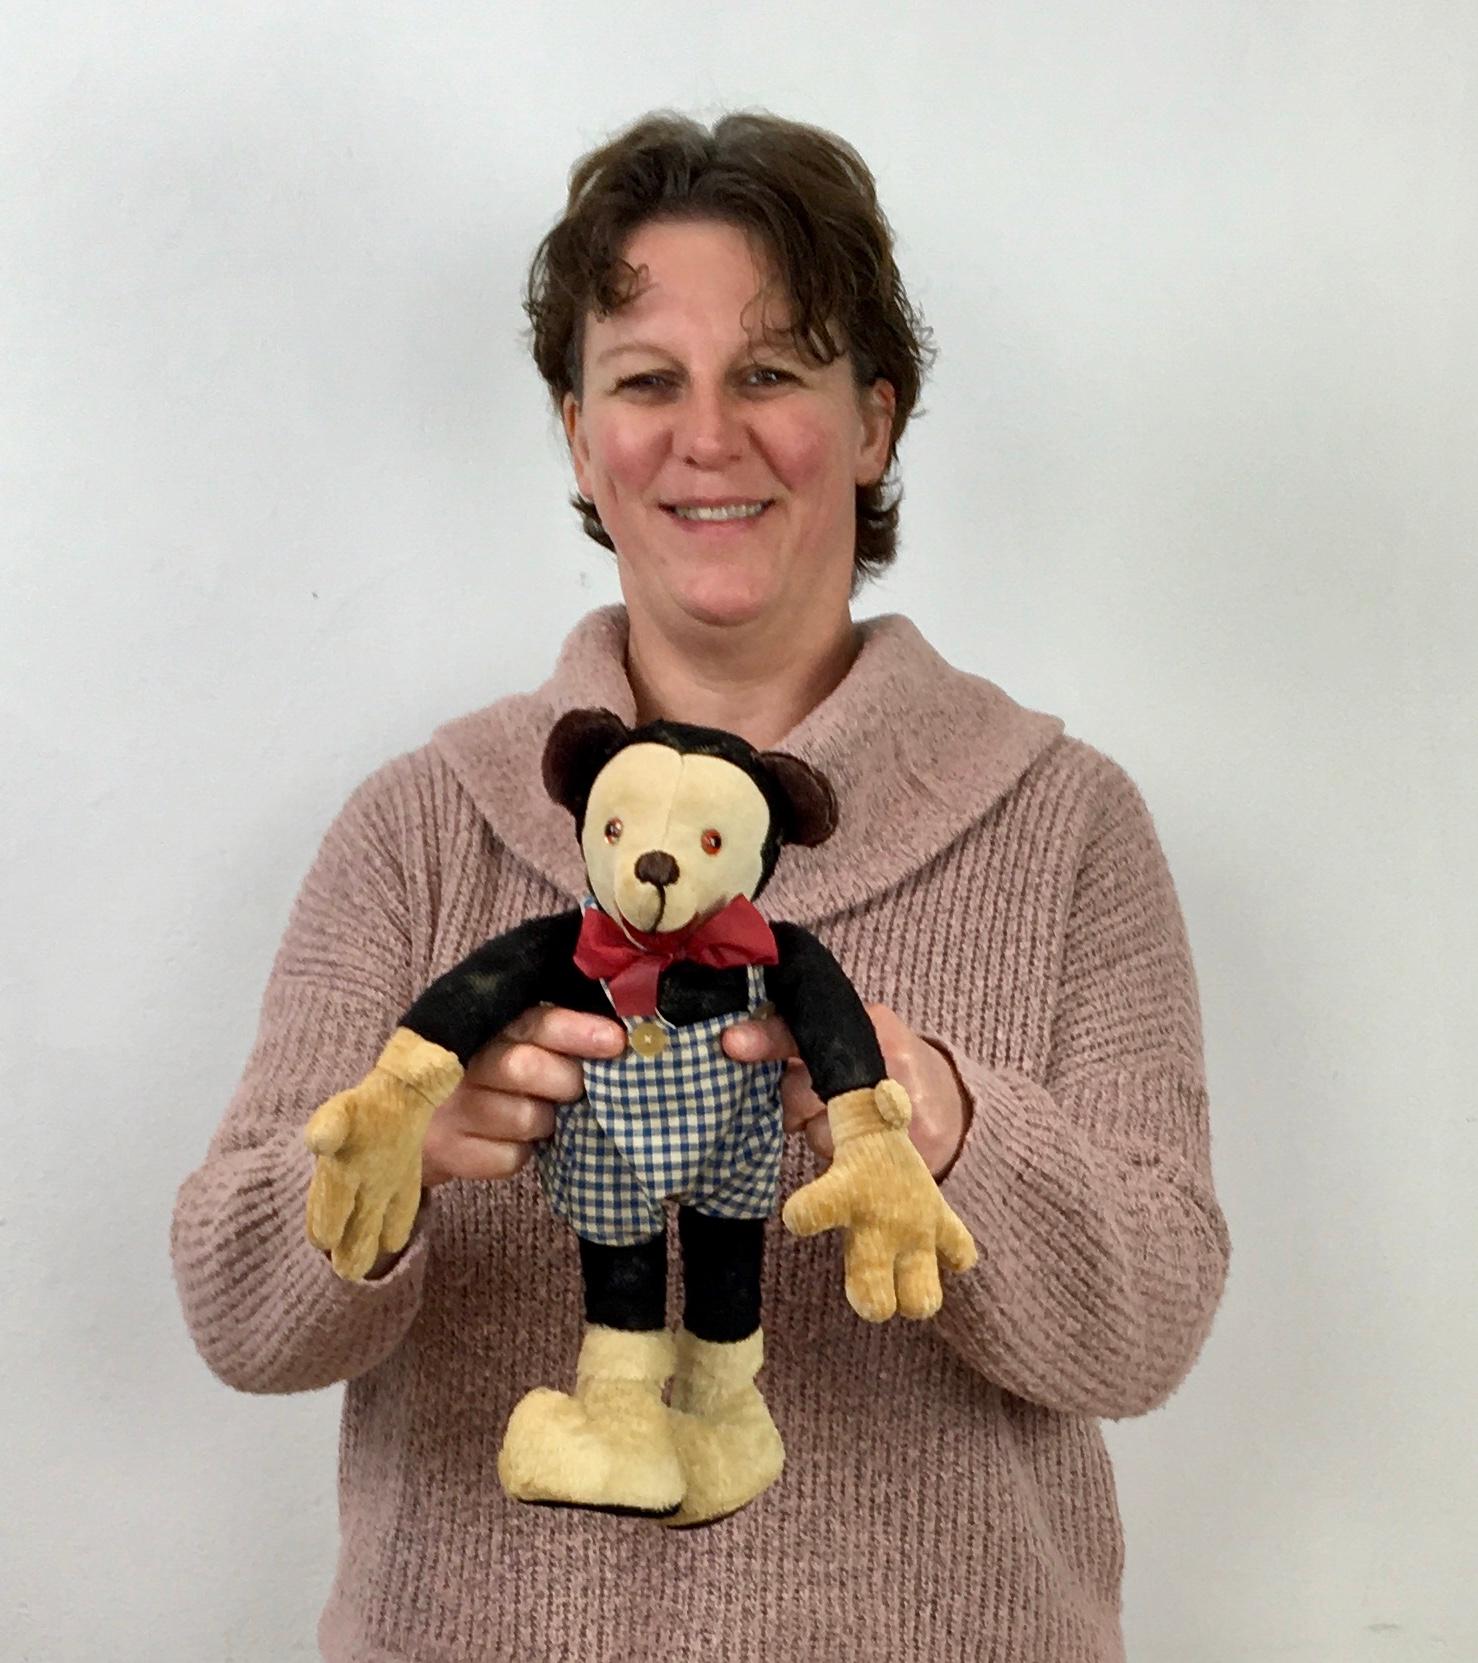 Vintage stuffed Mickey Doll. 
A Mickey Mouse children's toy circa 1930 - 1940. 
This Mickey doll is stuffed with straw, has glass eyes, a teddy open mouth, body and boots, cotton face, corduroy large gloves, a red bow and a checkered pair of